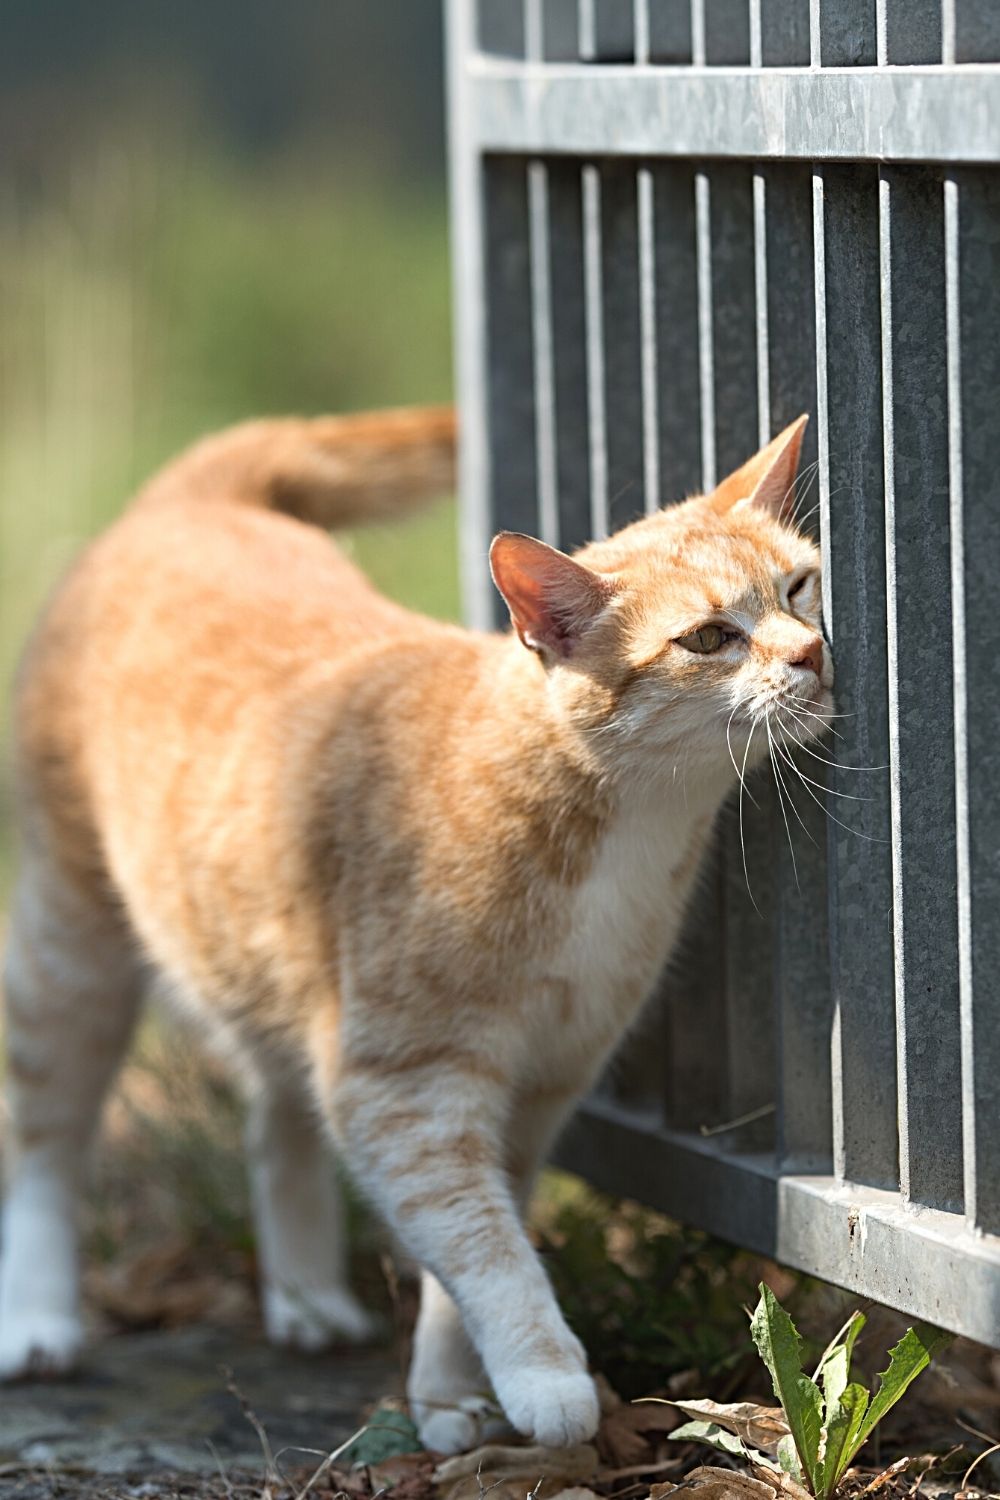 Cats leave their scents in their environment , which includes headbutting, for its comfort